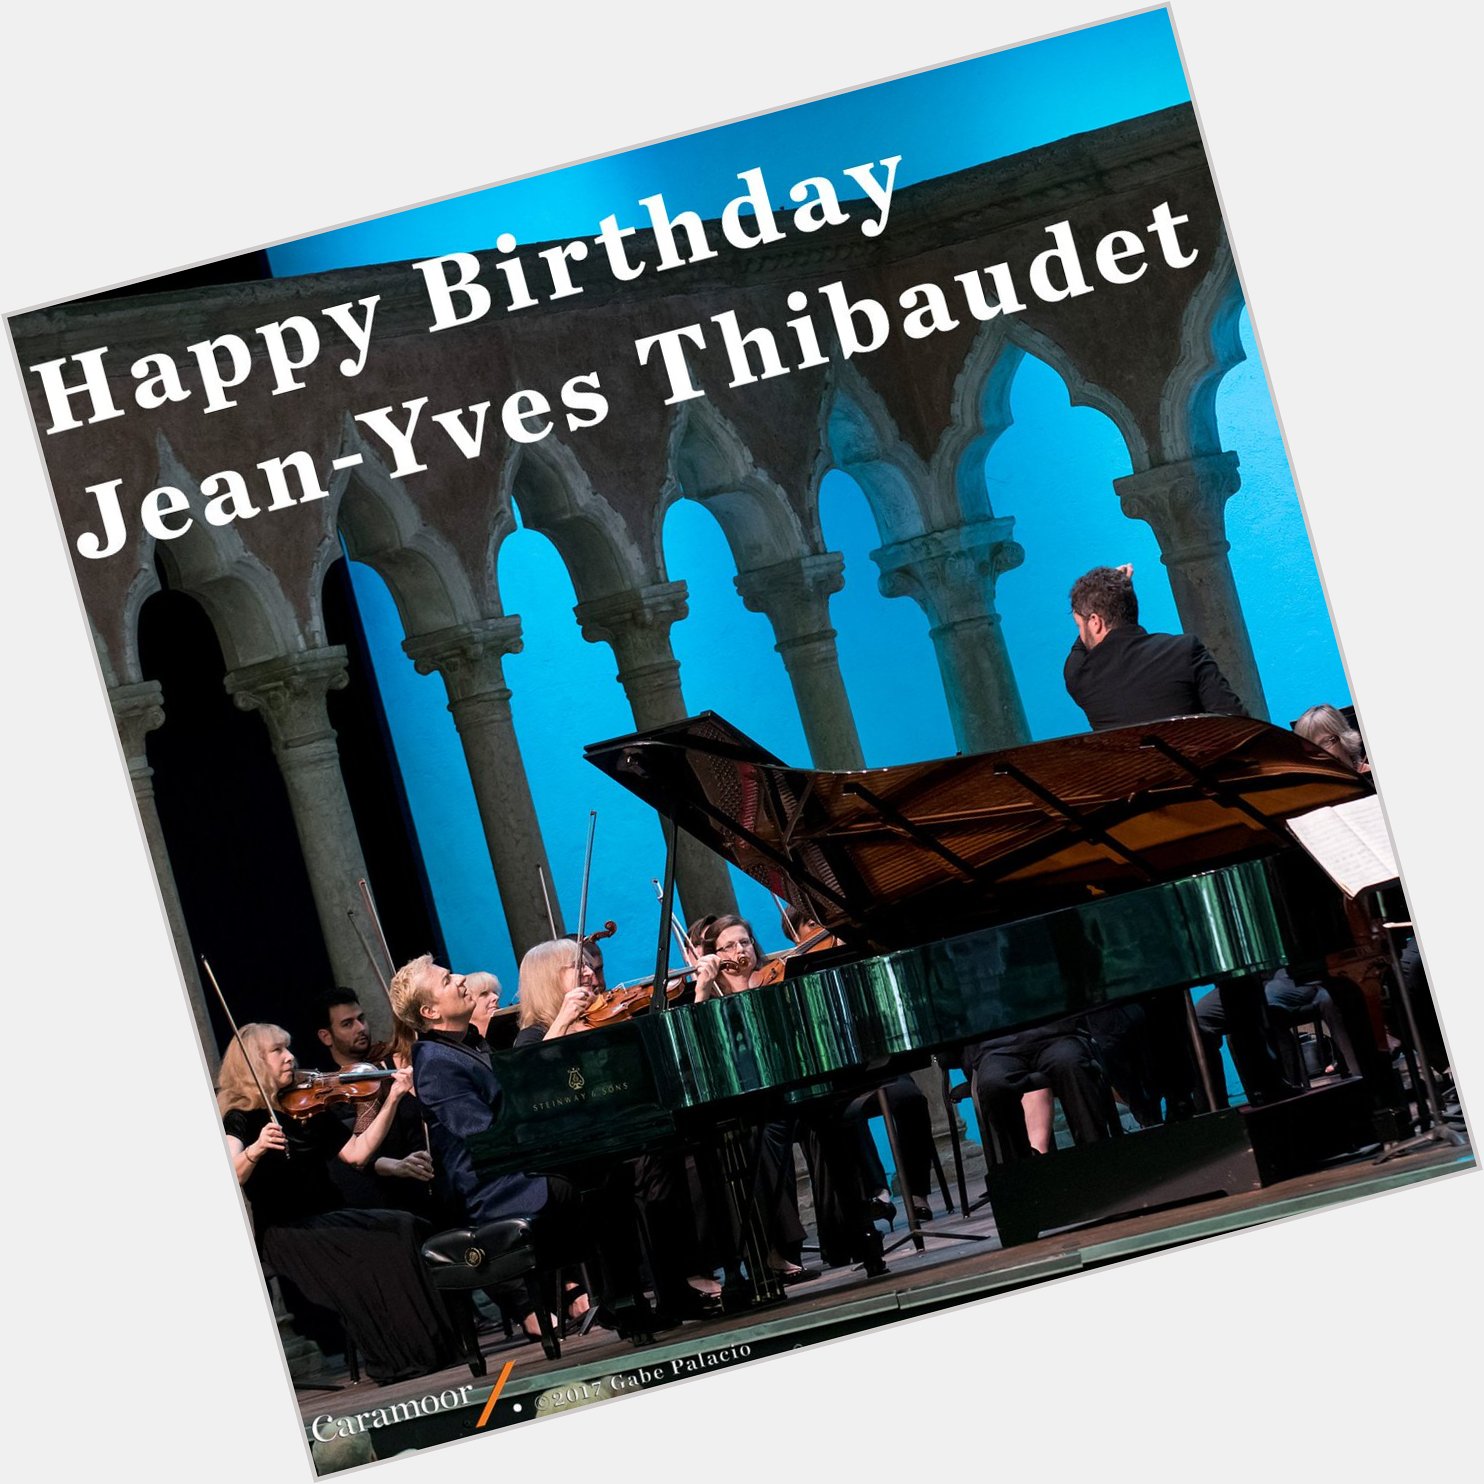 We want to wish a very happy birthday to Jean-Yves Thibaudet! 